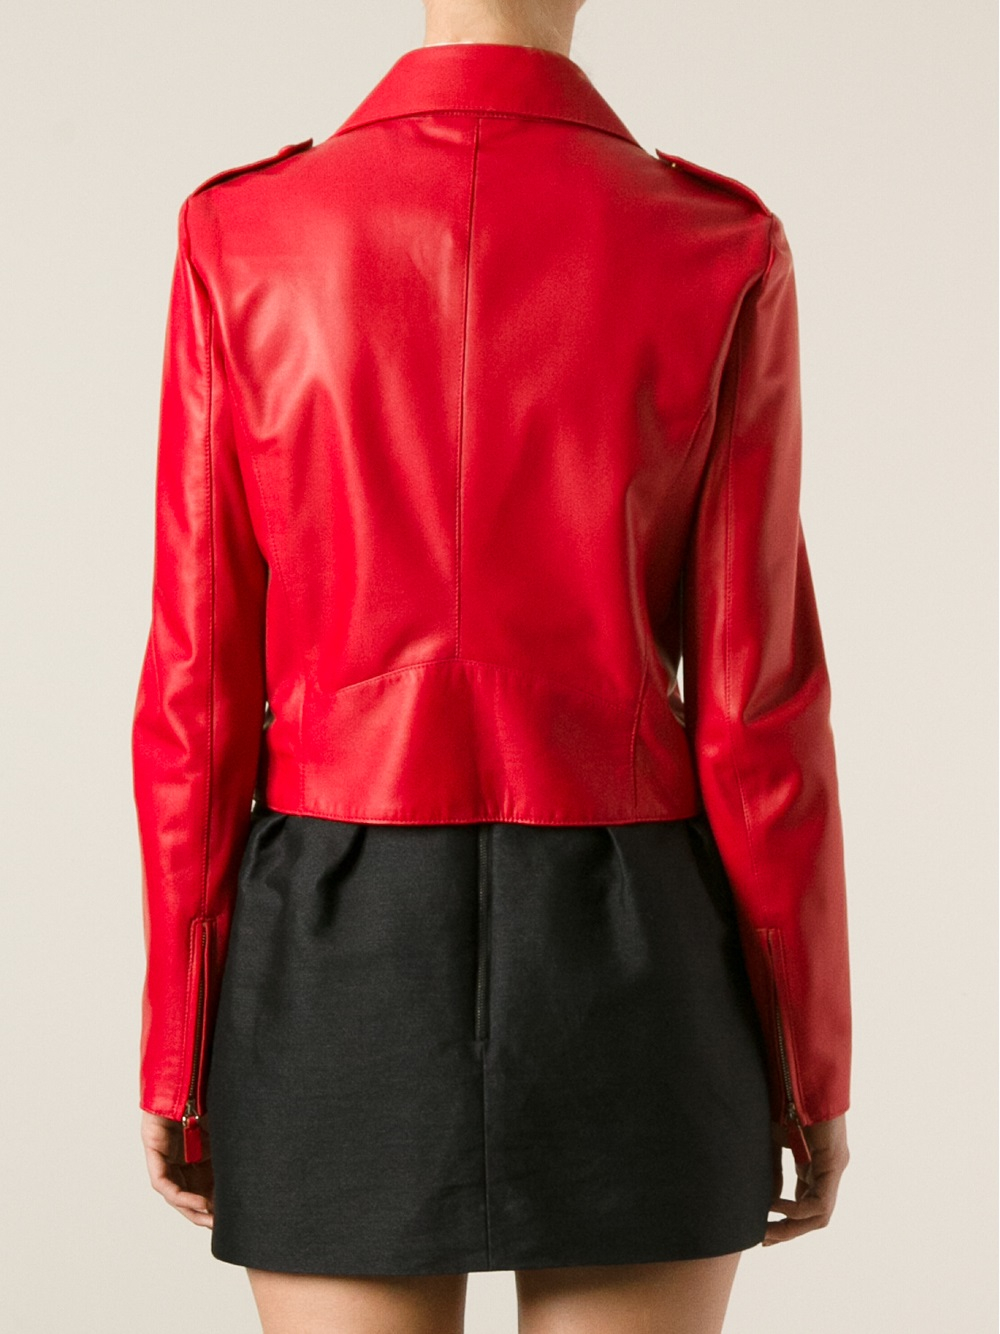 Valentino Leather Jacket in Red - Lyst